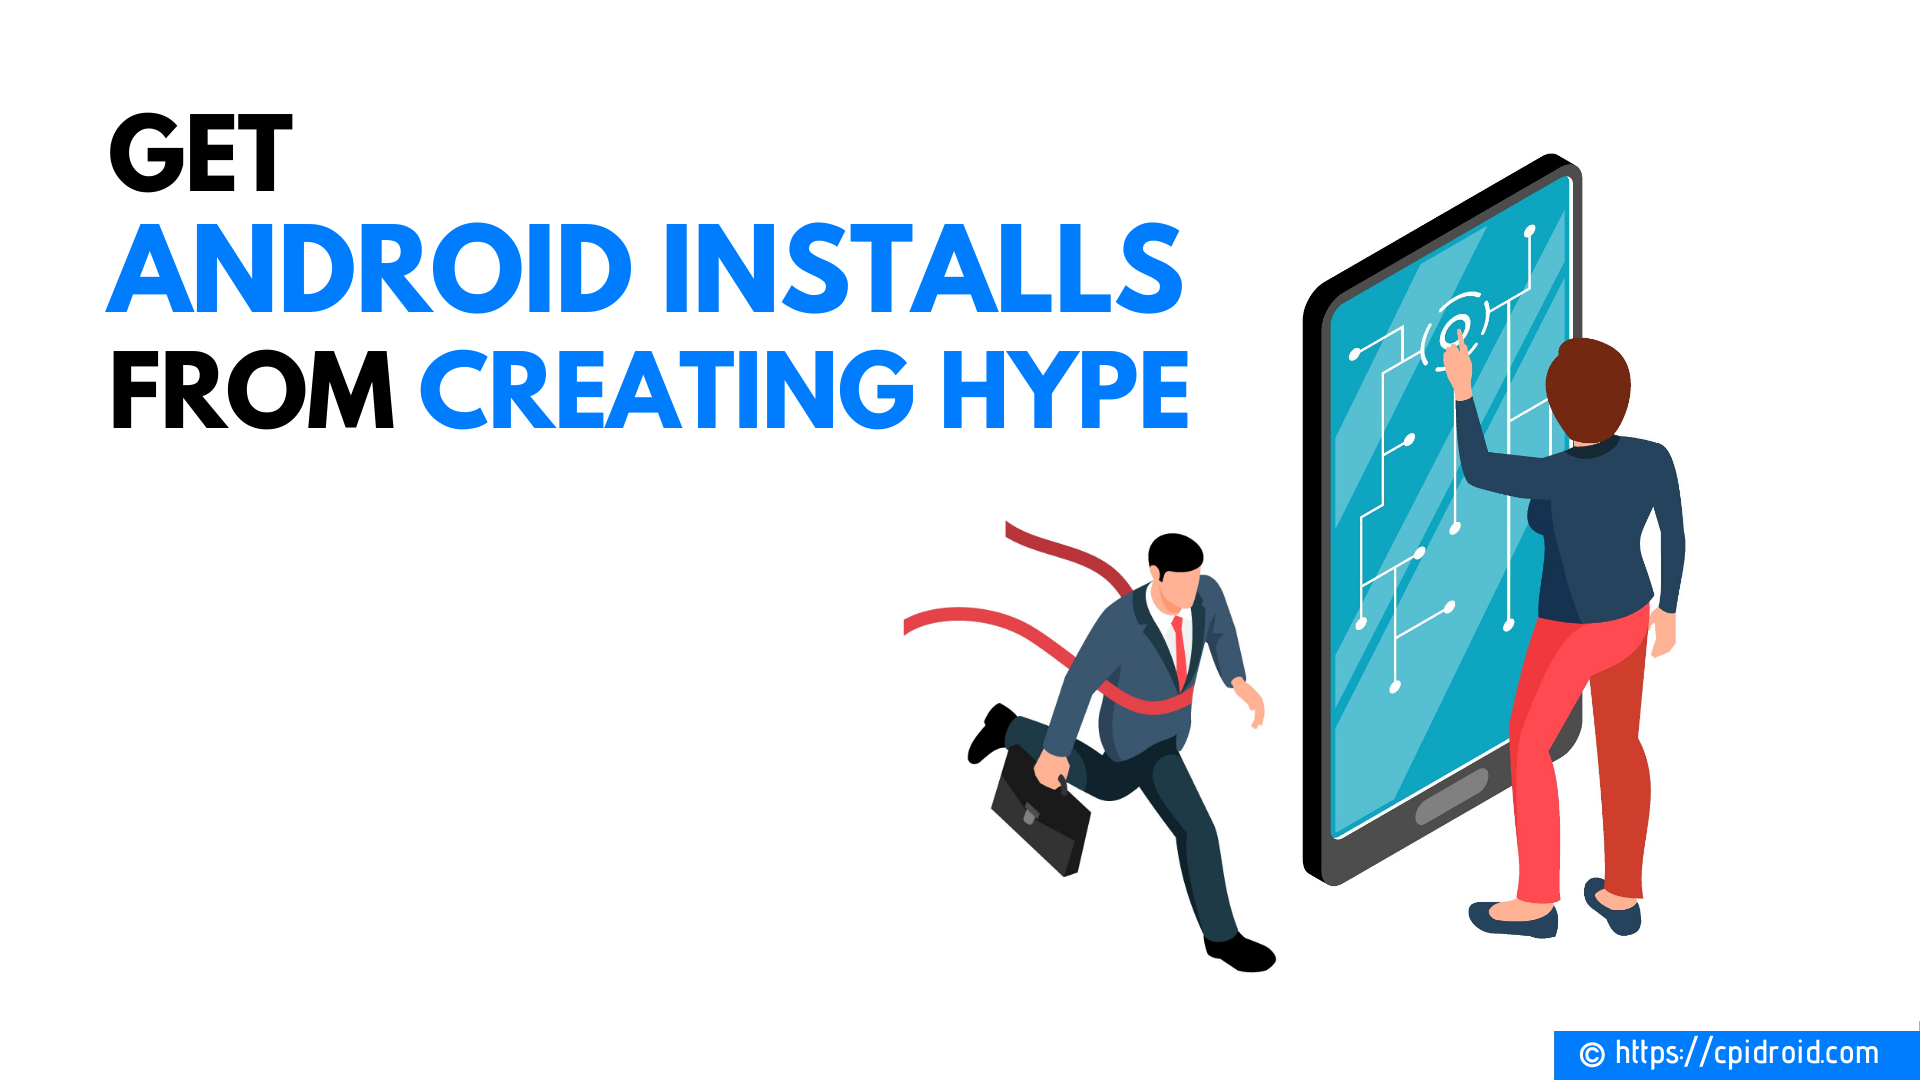 Buying Android Installs from Creating Hype